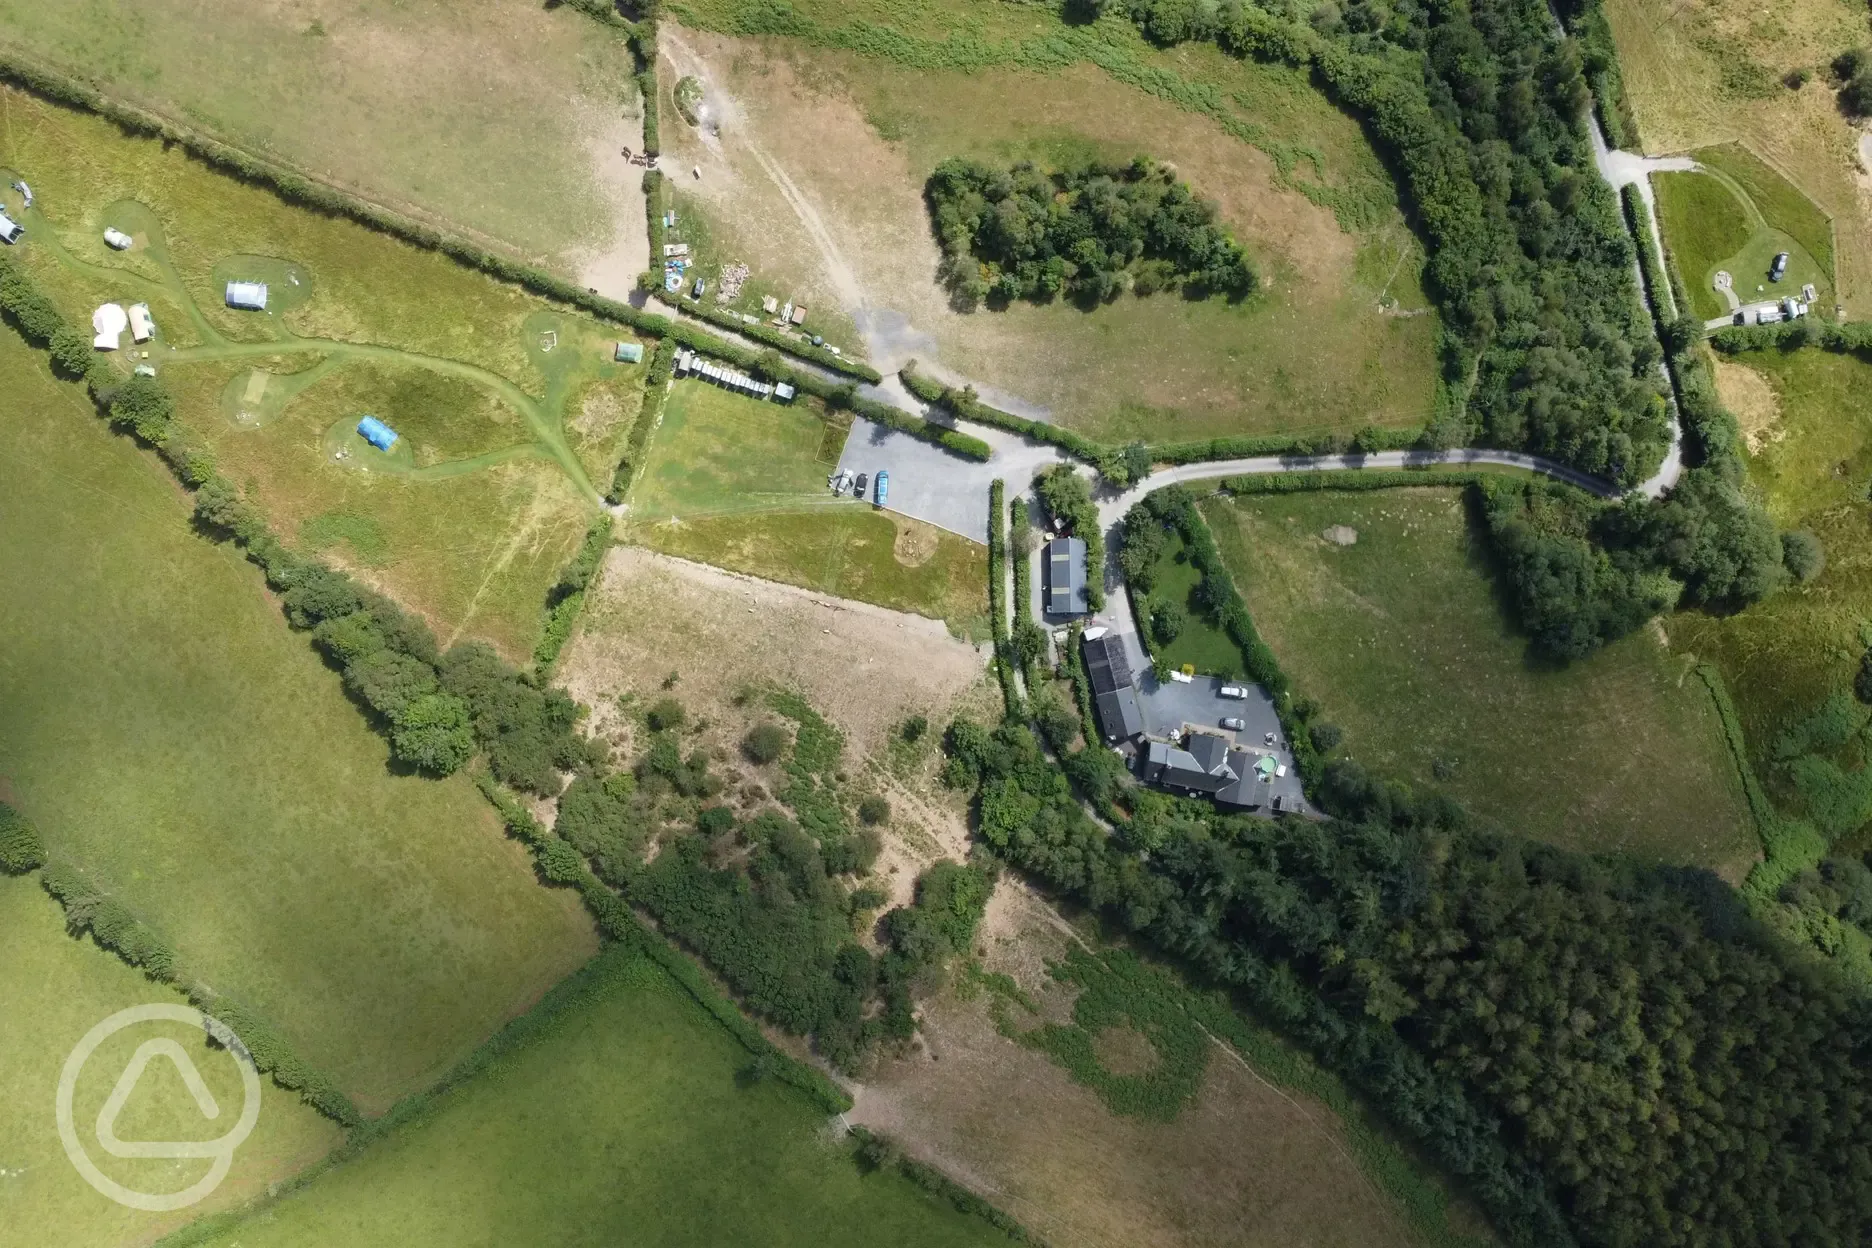 Birds eye view of the site